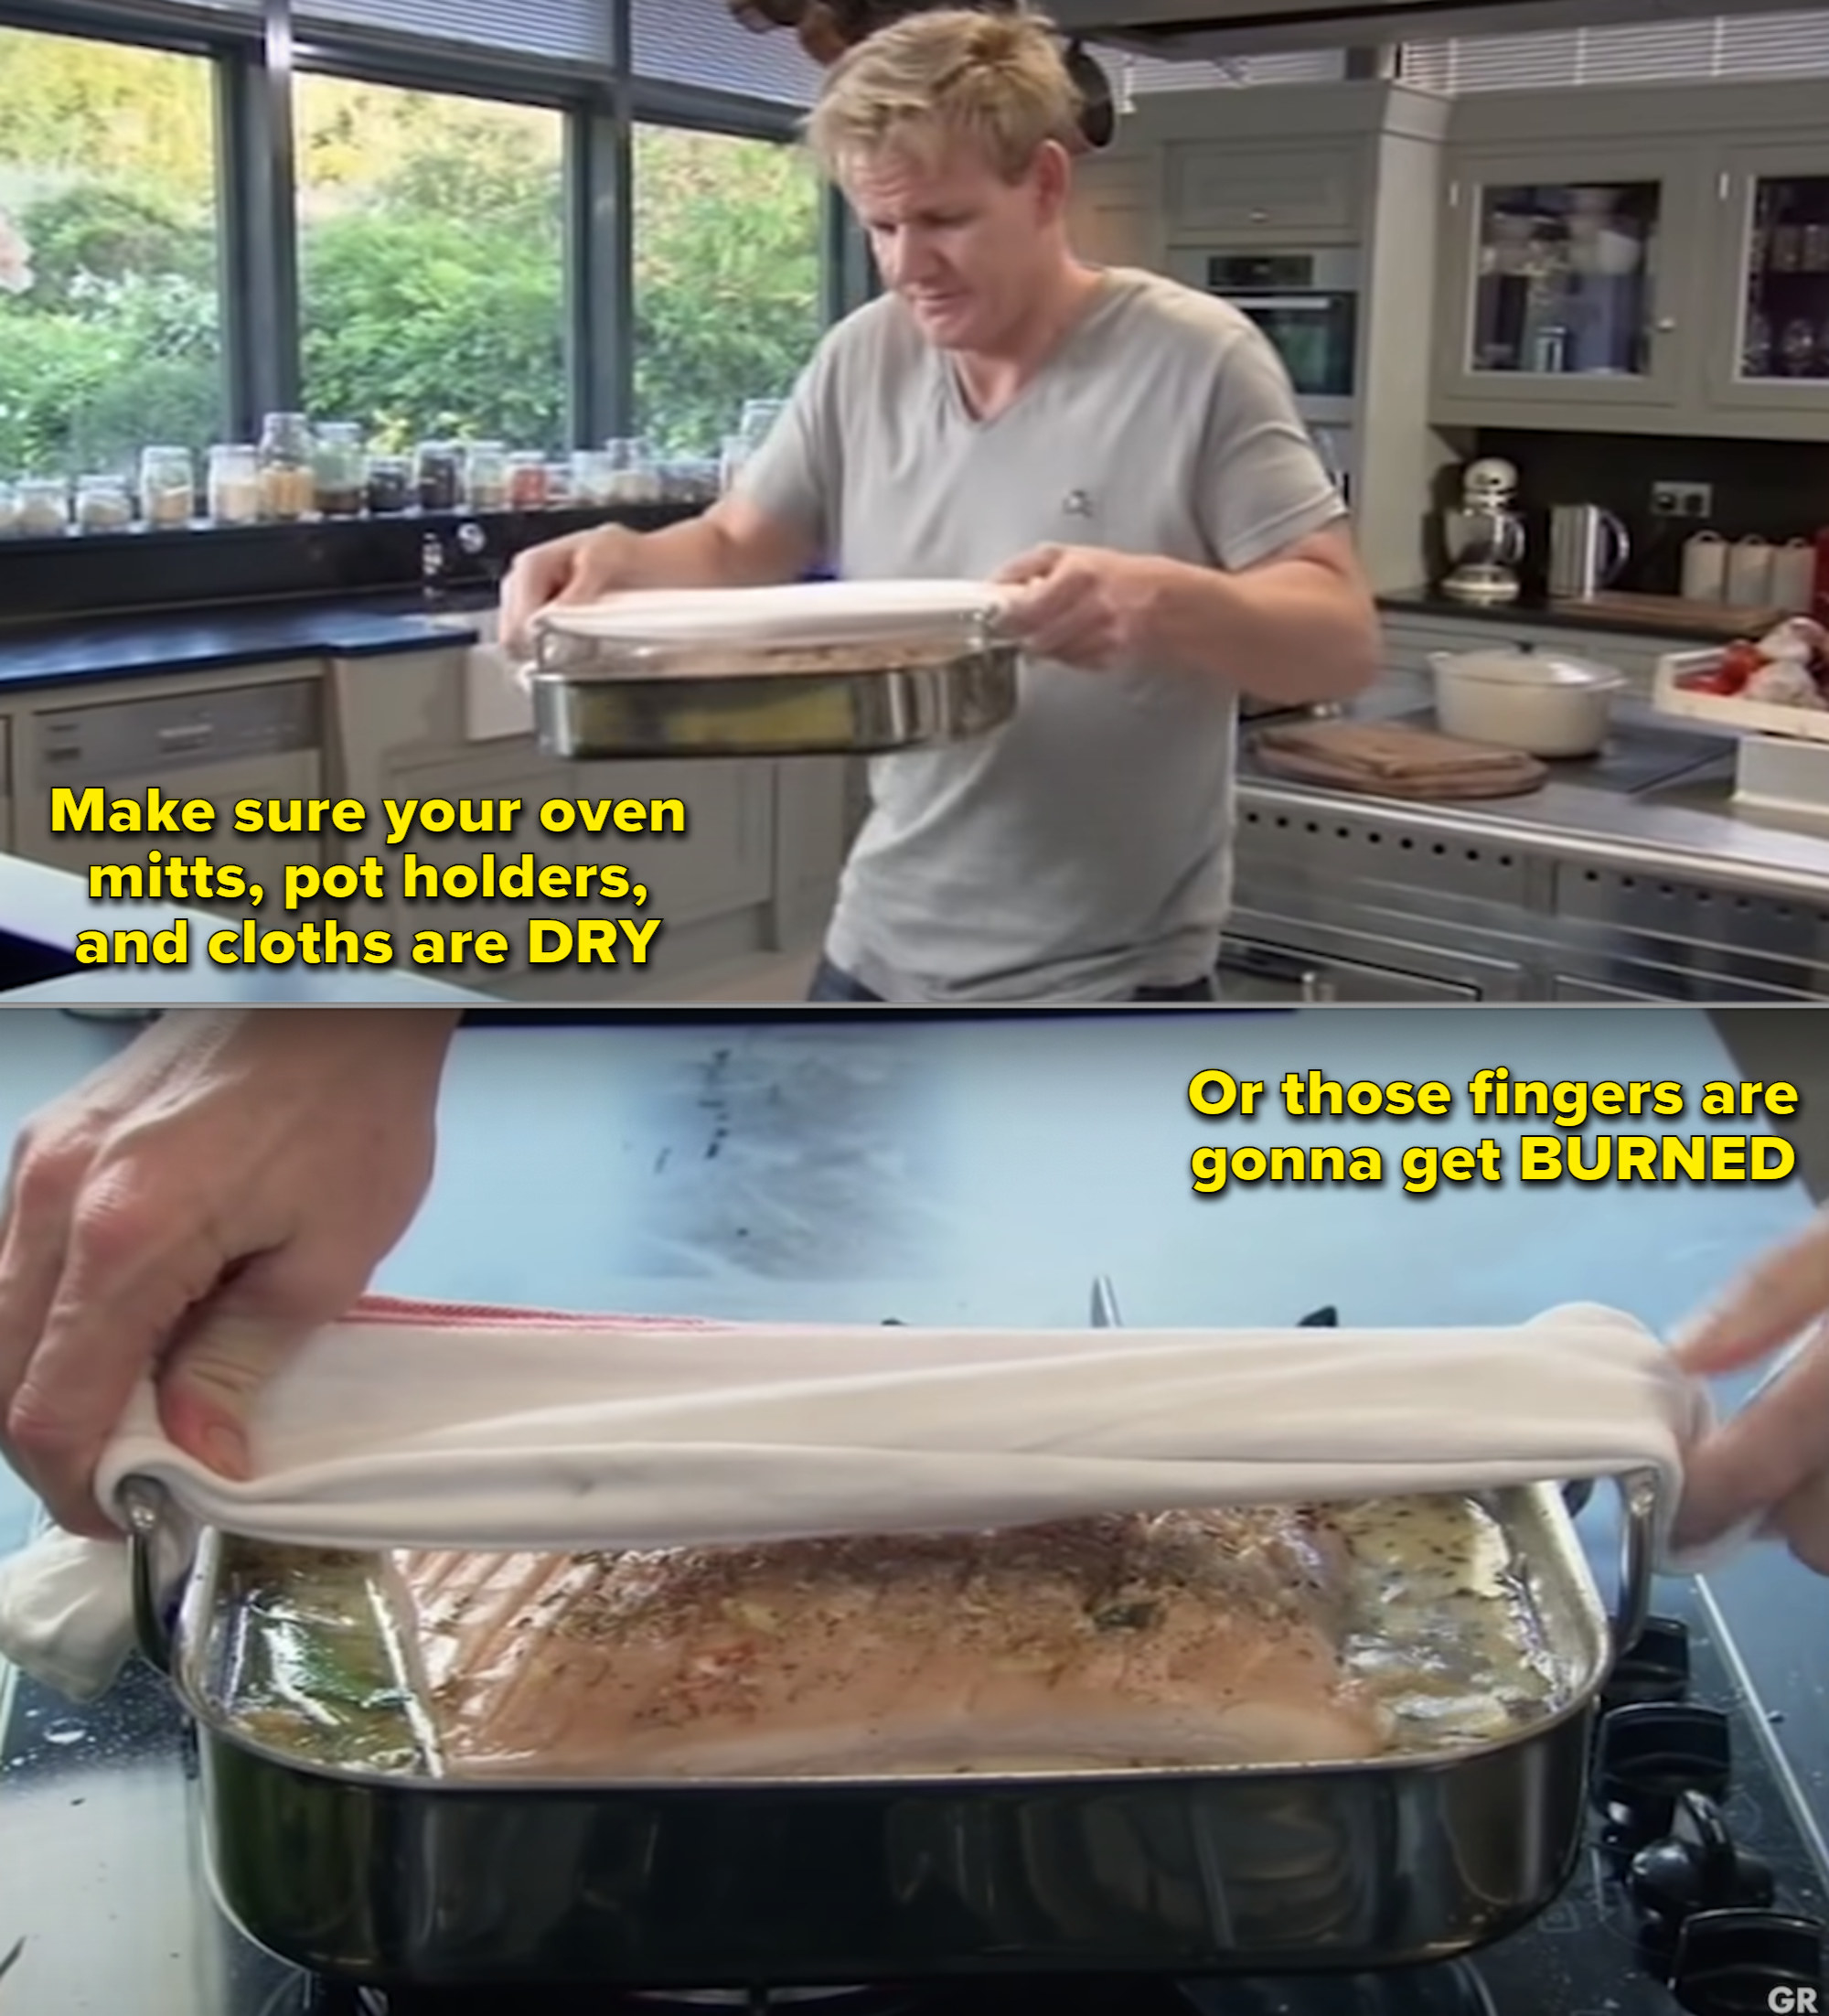 Gordon Ramsay moving a pot from the oven and saying to make sure your mitts and pot holders are dry or else your fingers &quot;are gonna get burned&quot;